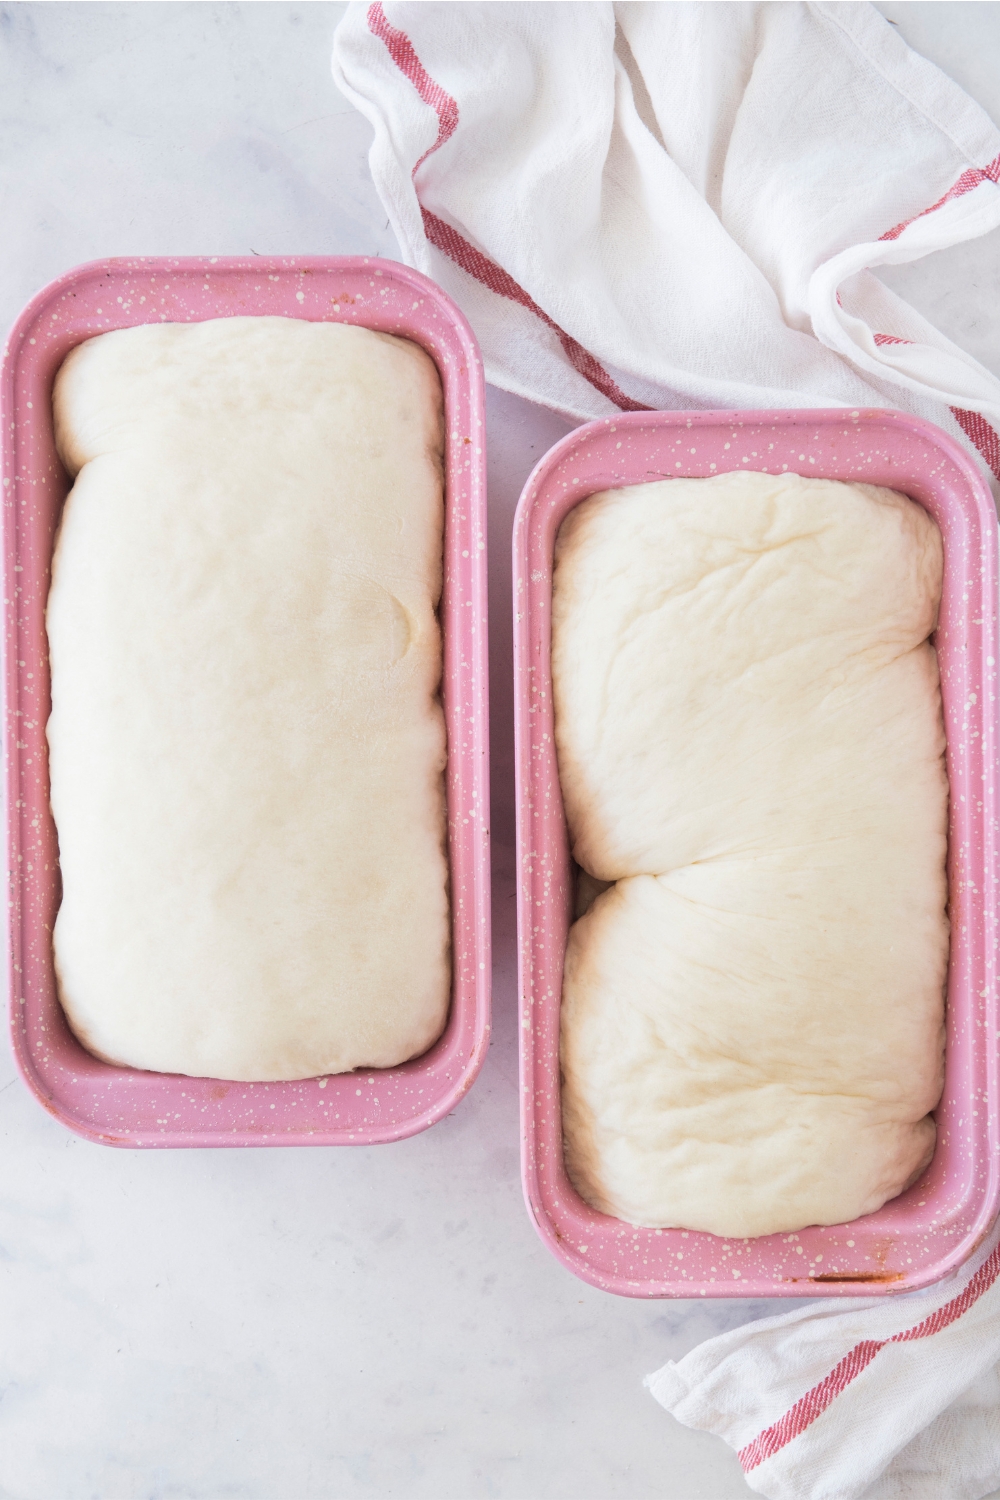 Two loaf pans with dough rising.